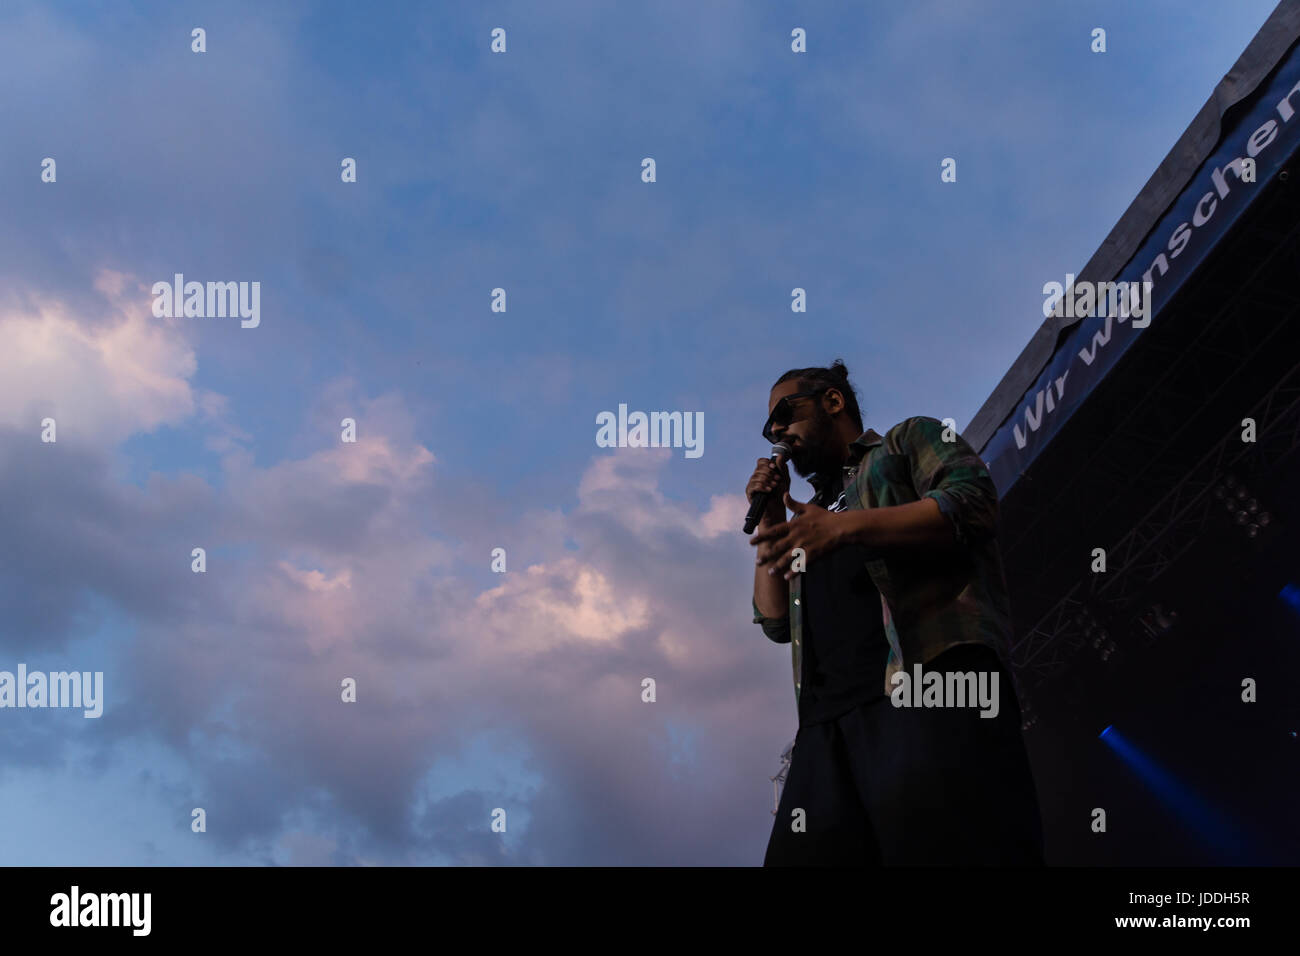 Kiel, Germany. 19th June, 2017.The Rapper Samy Deluxe is performing on the Hörn stage during the Kieler Woche 2017 Credit: Björn Deutschmann/Alamy Live News Stock Photo